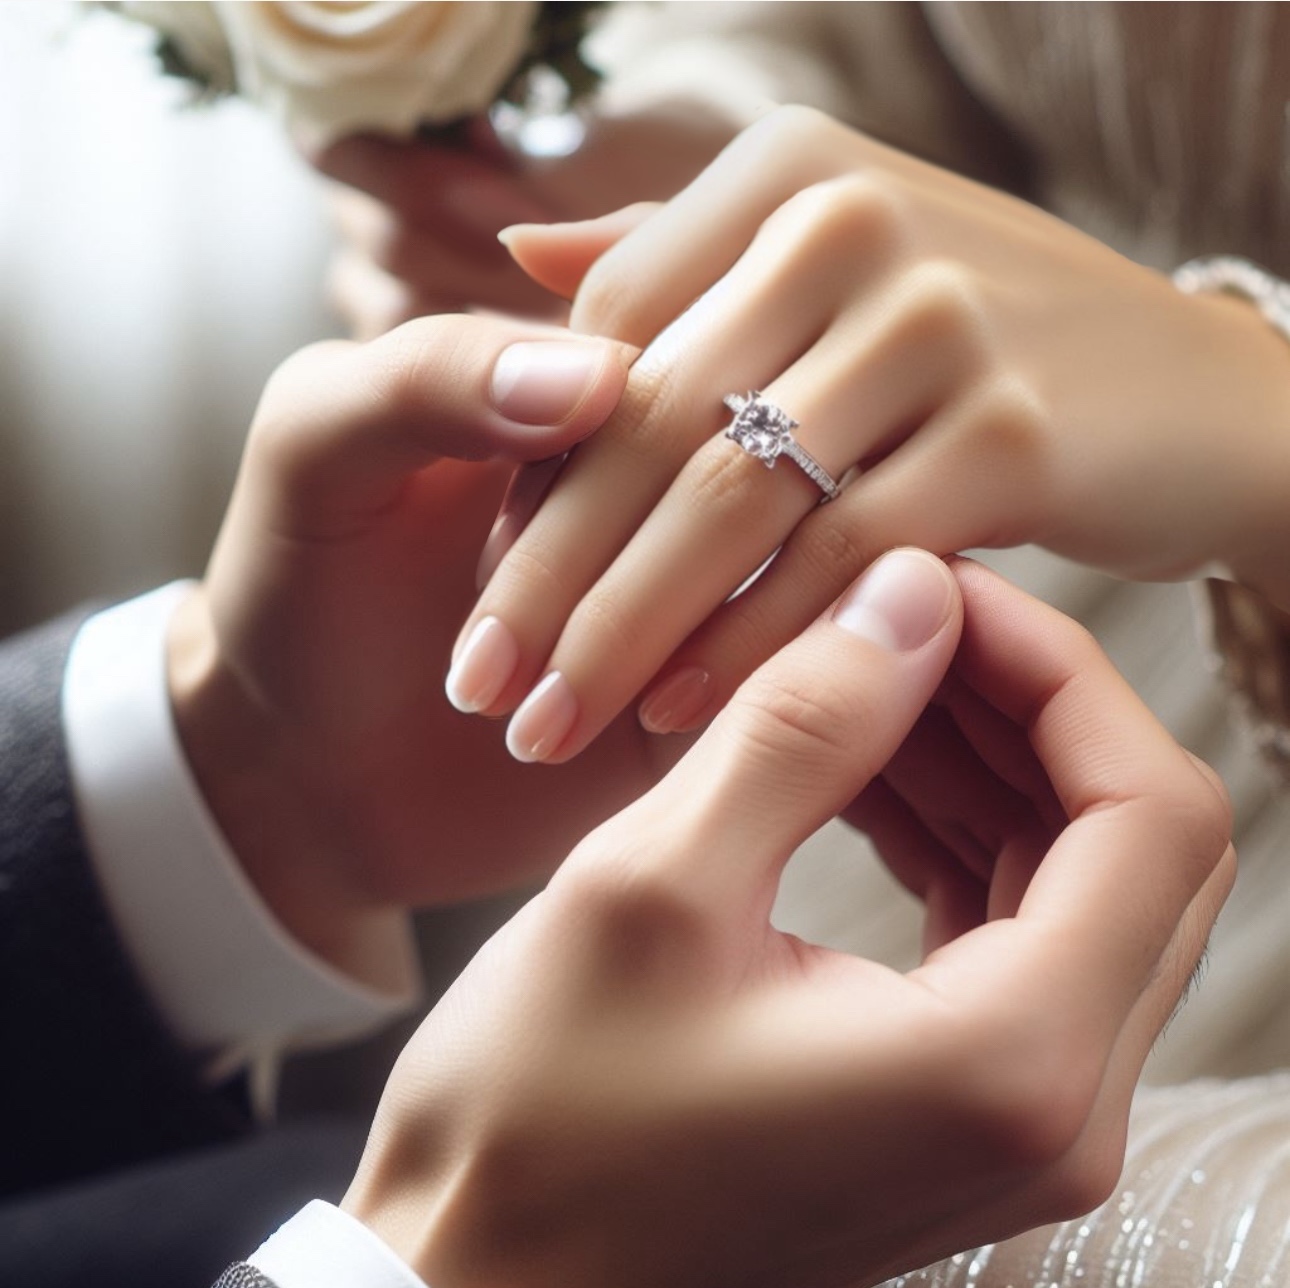 Engagement ring being placed on the ring finger on the left hand